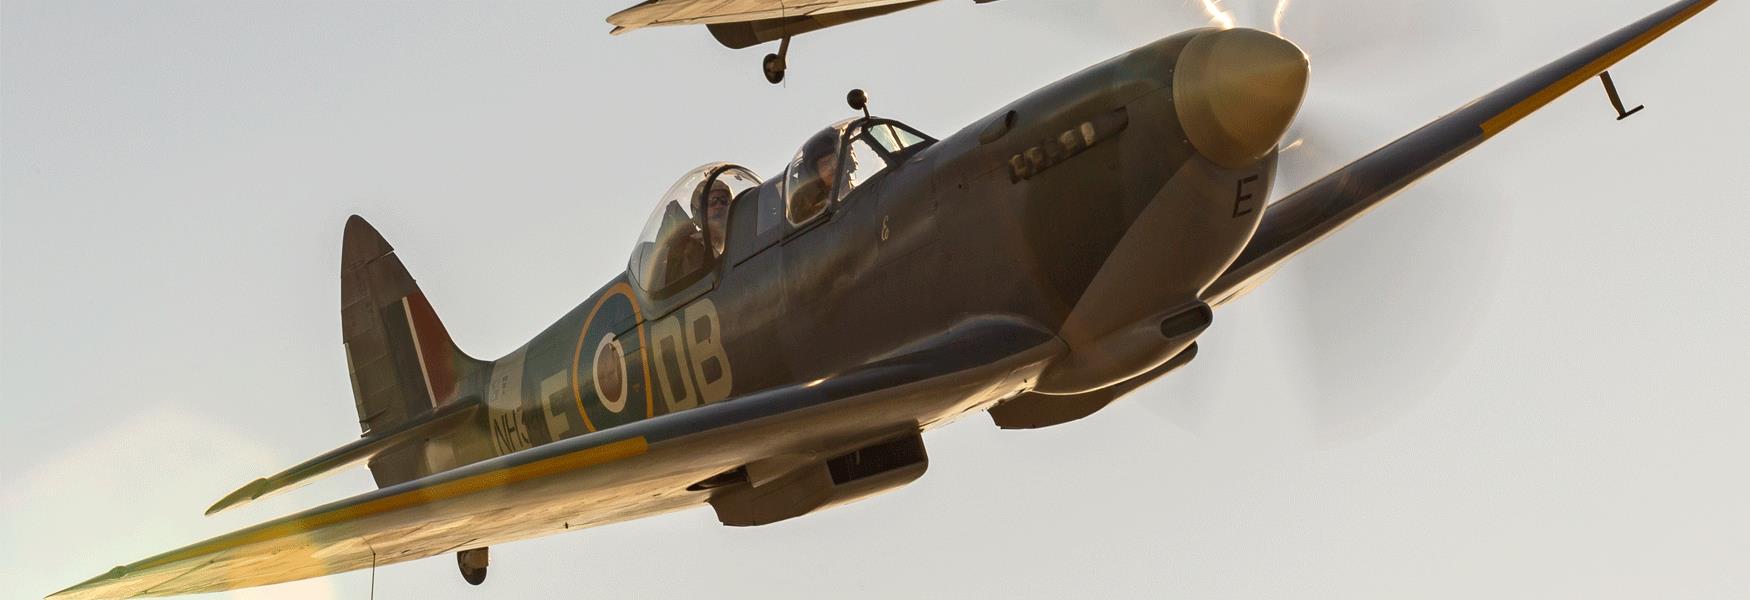 Battle of Britain Airshow, Headcorn, Maidstone, Kent.  September 2020, with Spitfires and a host of pristine antique aircraft taking to the skies.